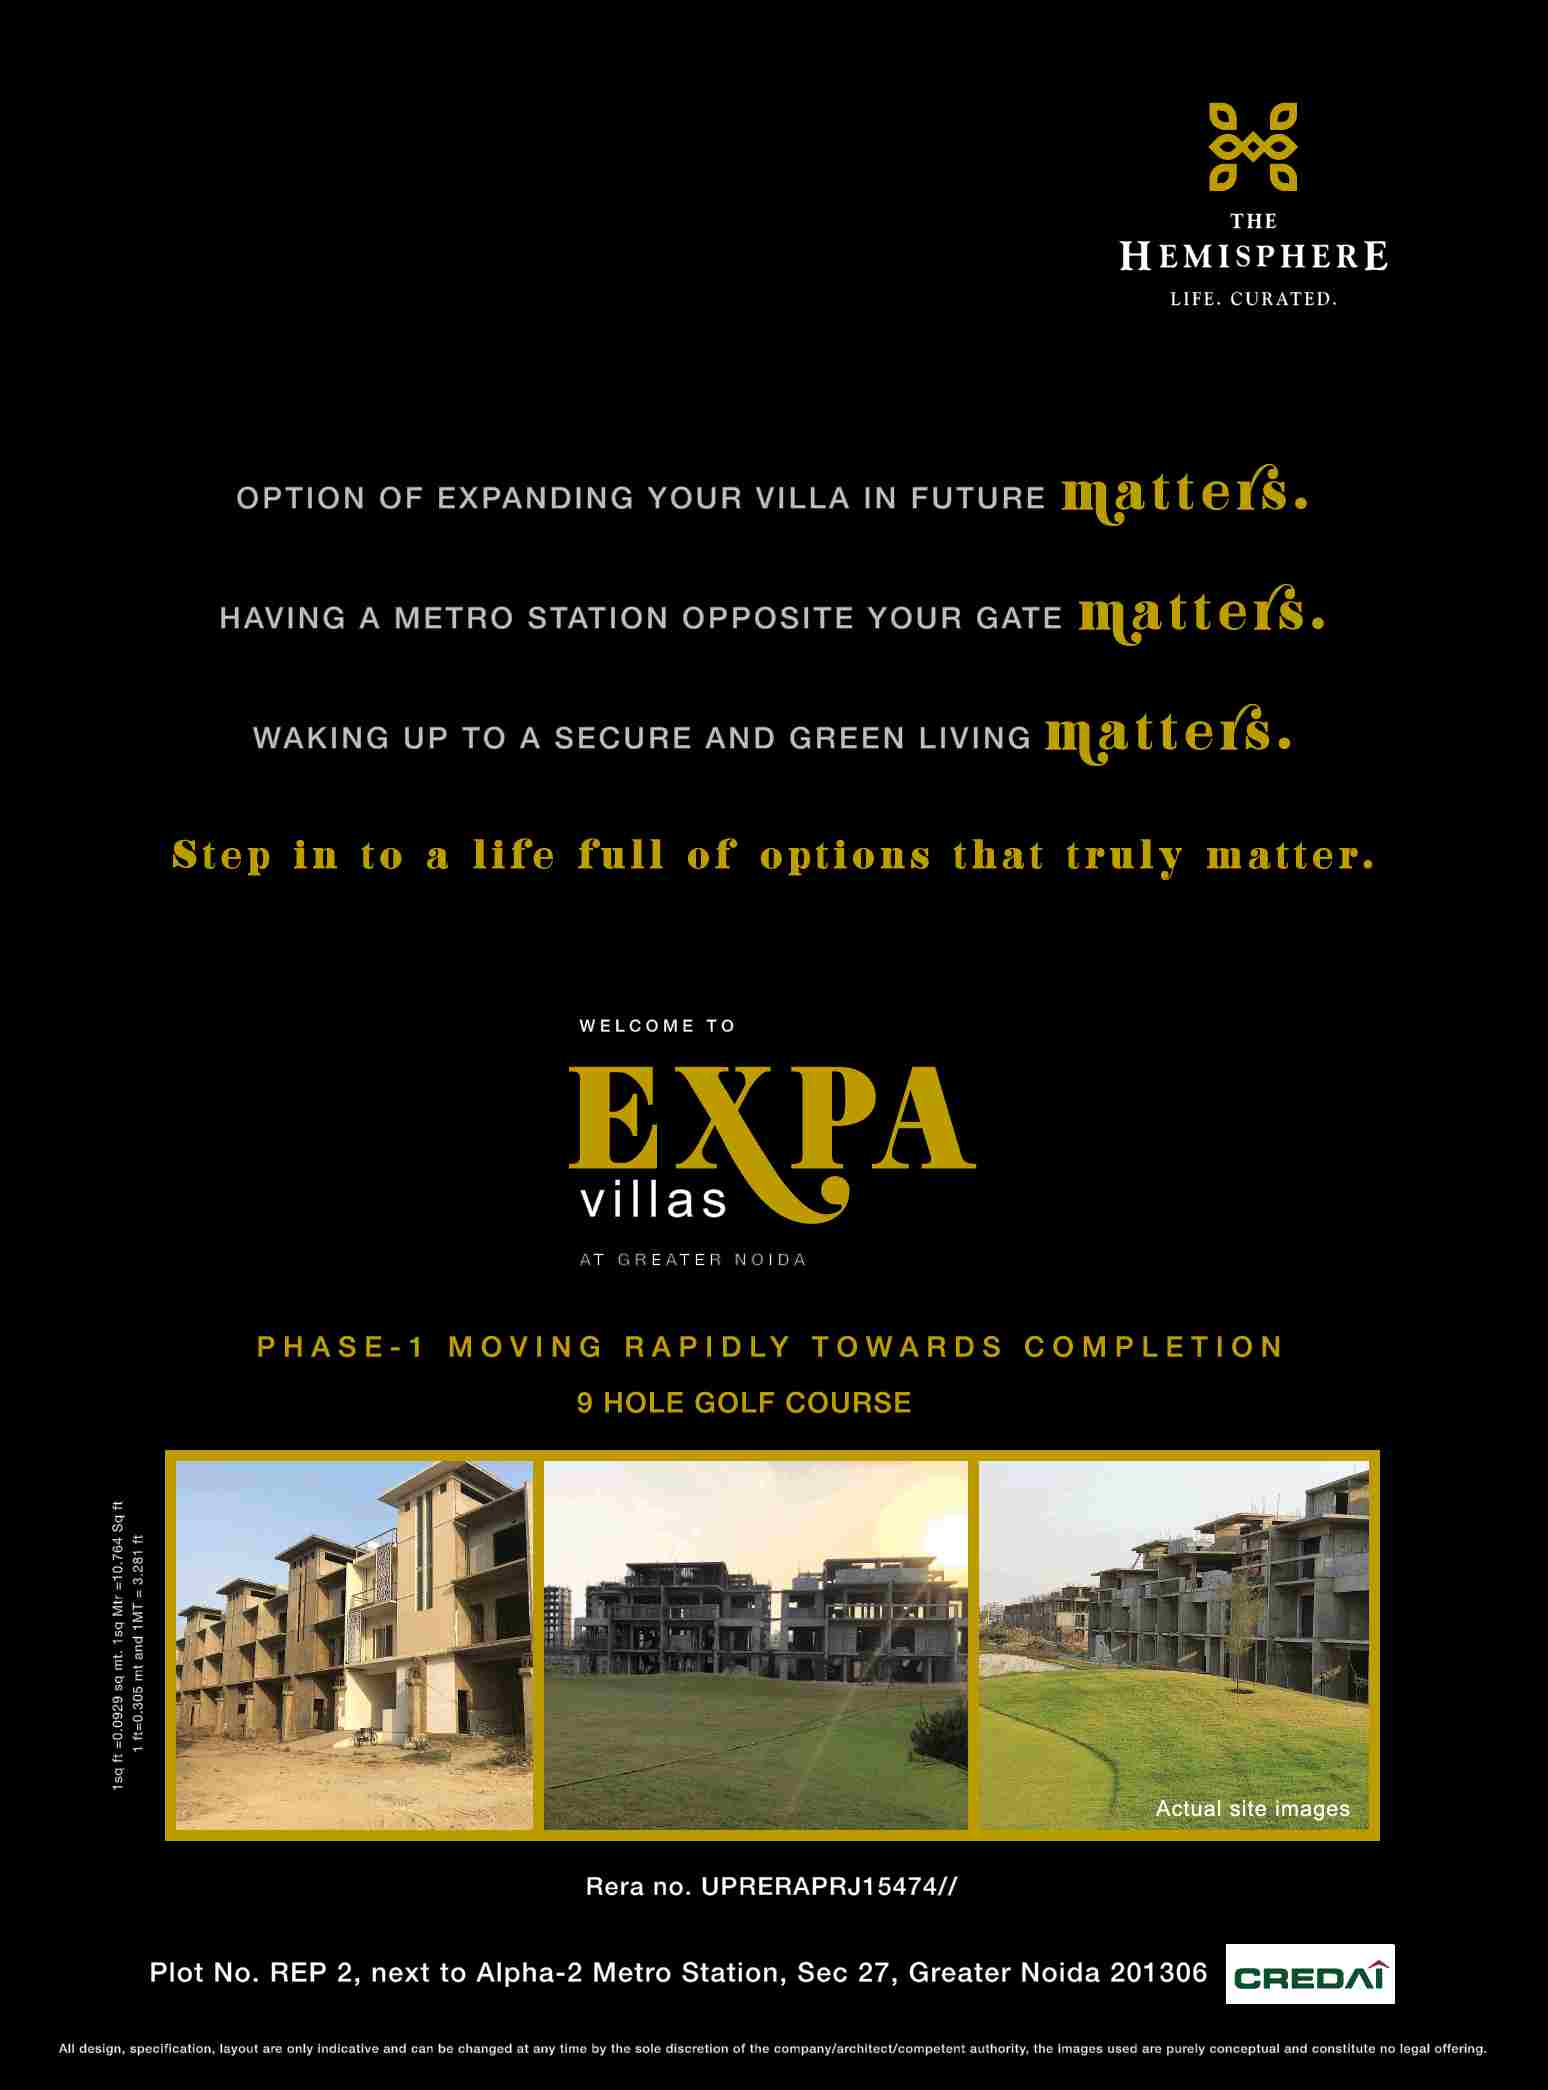 Step into a life full of options that  truly matter at The Hemisphere Expa Villas in Greater Noida